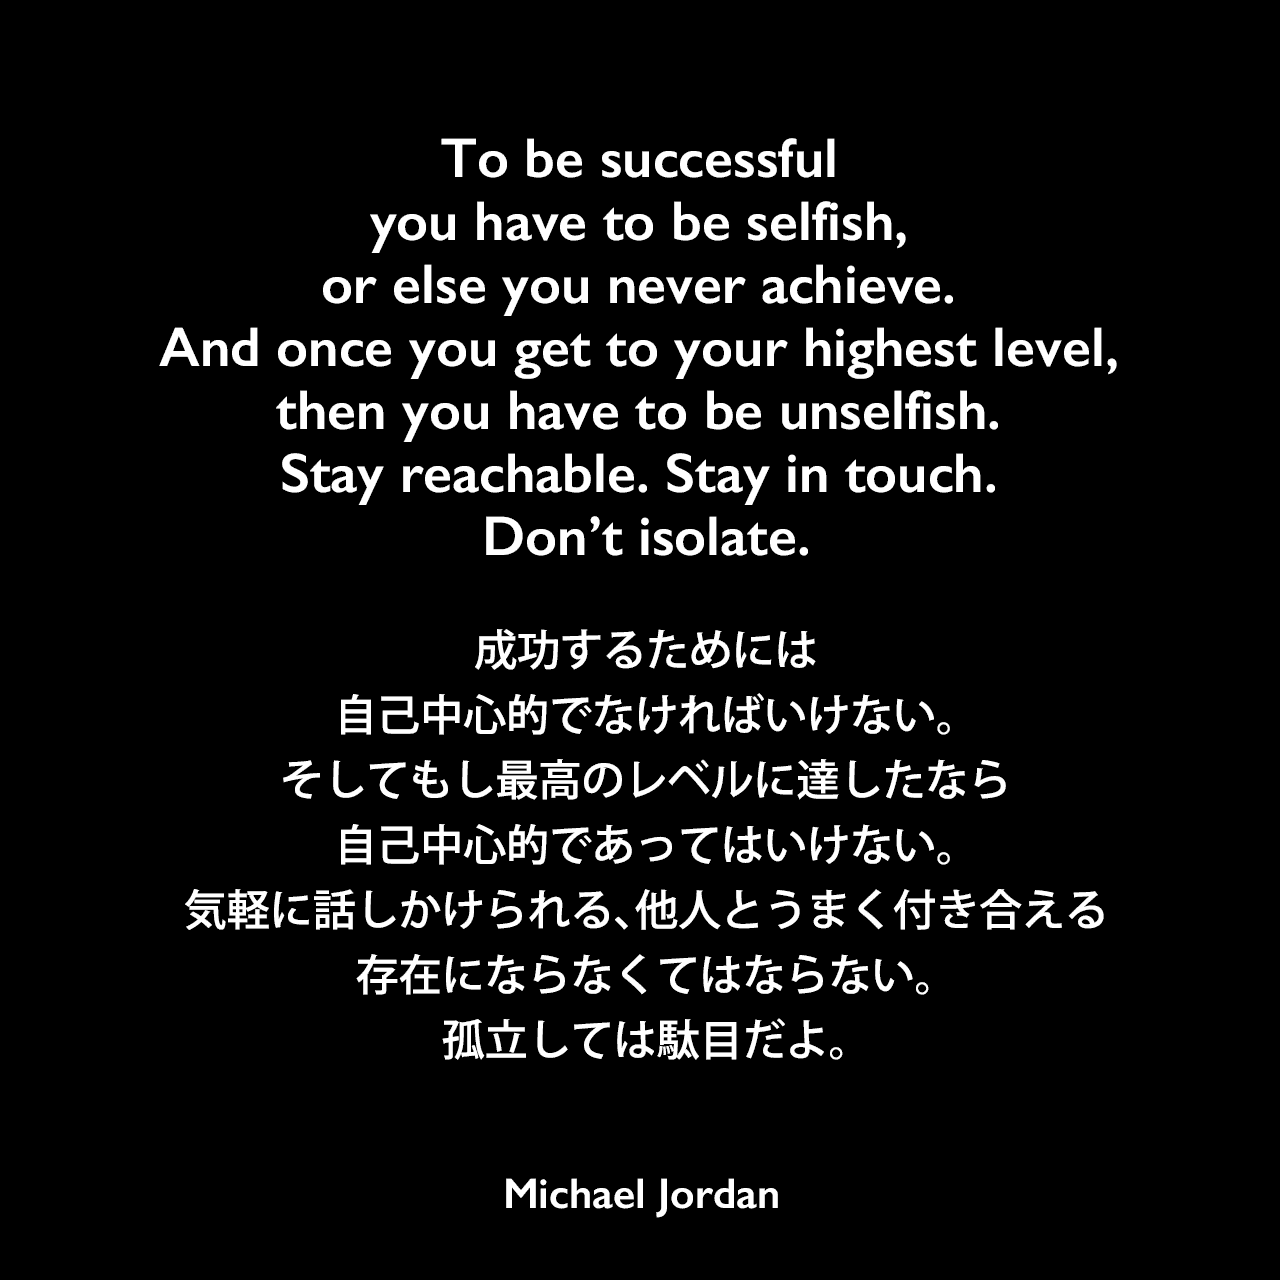 To be successful you have to be selfish, or else you never achieve. And once you get to your highest level, then you have to be unselfish. Stay reachable. Stay in touch. Don’t isolate.成功するためには自己中心的でなければいけない。そしてもし最高のレベルに達したなら、自己中心的であってはいけない。気軽に話しかけられる、他人とうまく付き合える存在にならなくてはならない。孤立しては駄目だよ。Michael Jordan